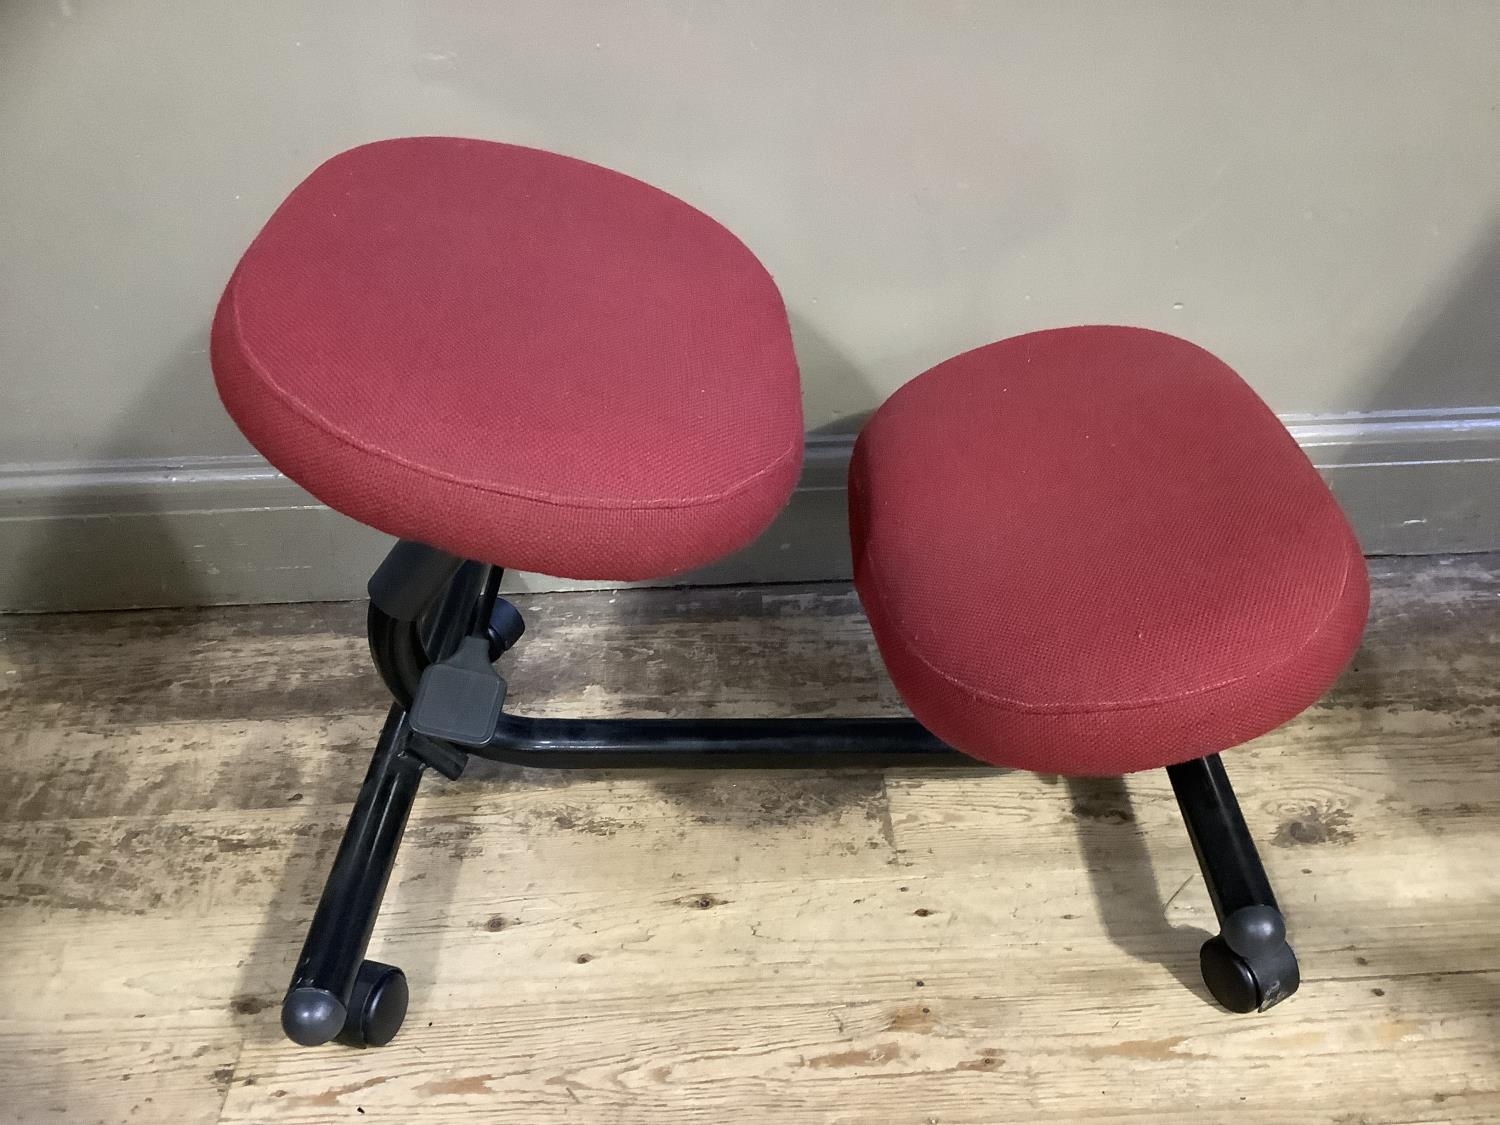 An ergonomic chair with red upholstered seat - Bild 2 aus 3